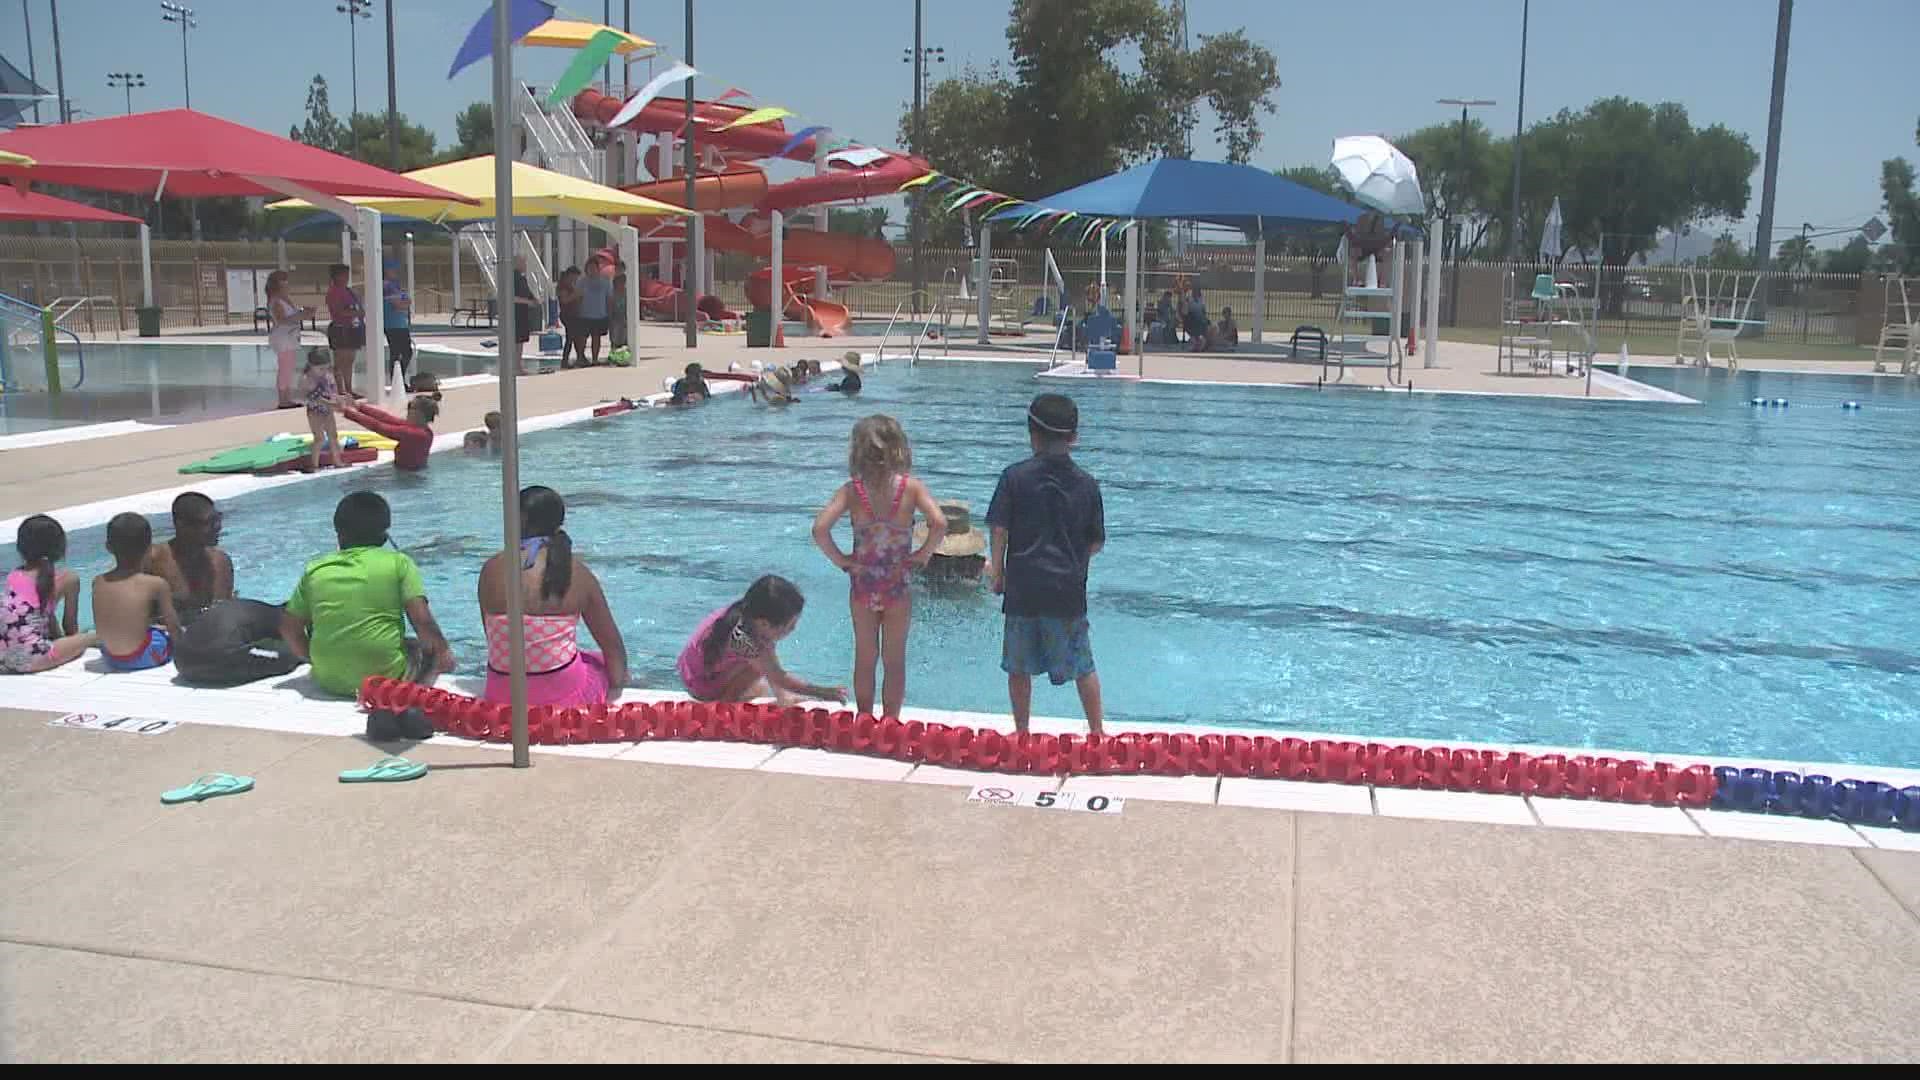 On Memorial Day, the city of Phoenix will open 14 of its 29 public pools because of a lack of staff. The city of Glendale only has half of the lifeguards they need.